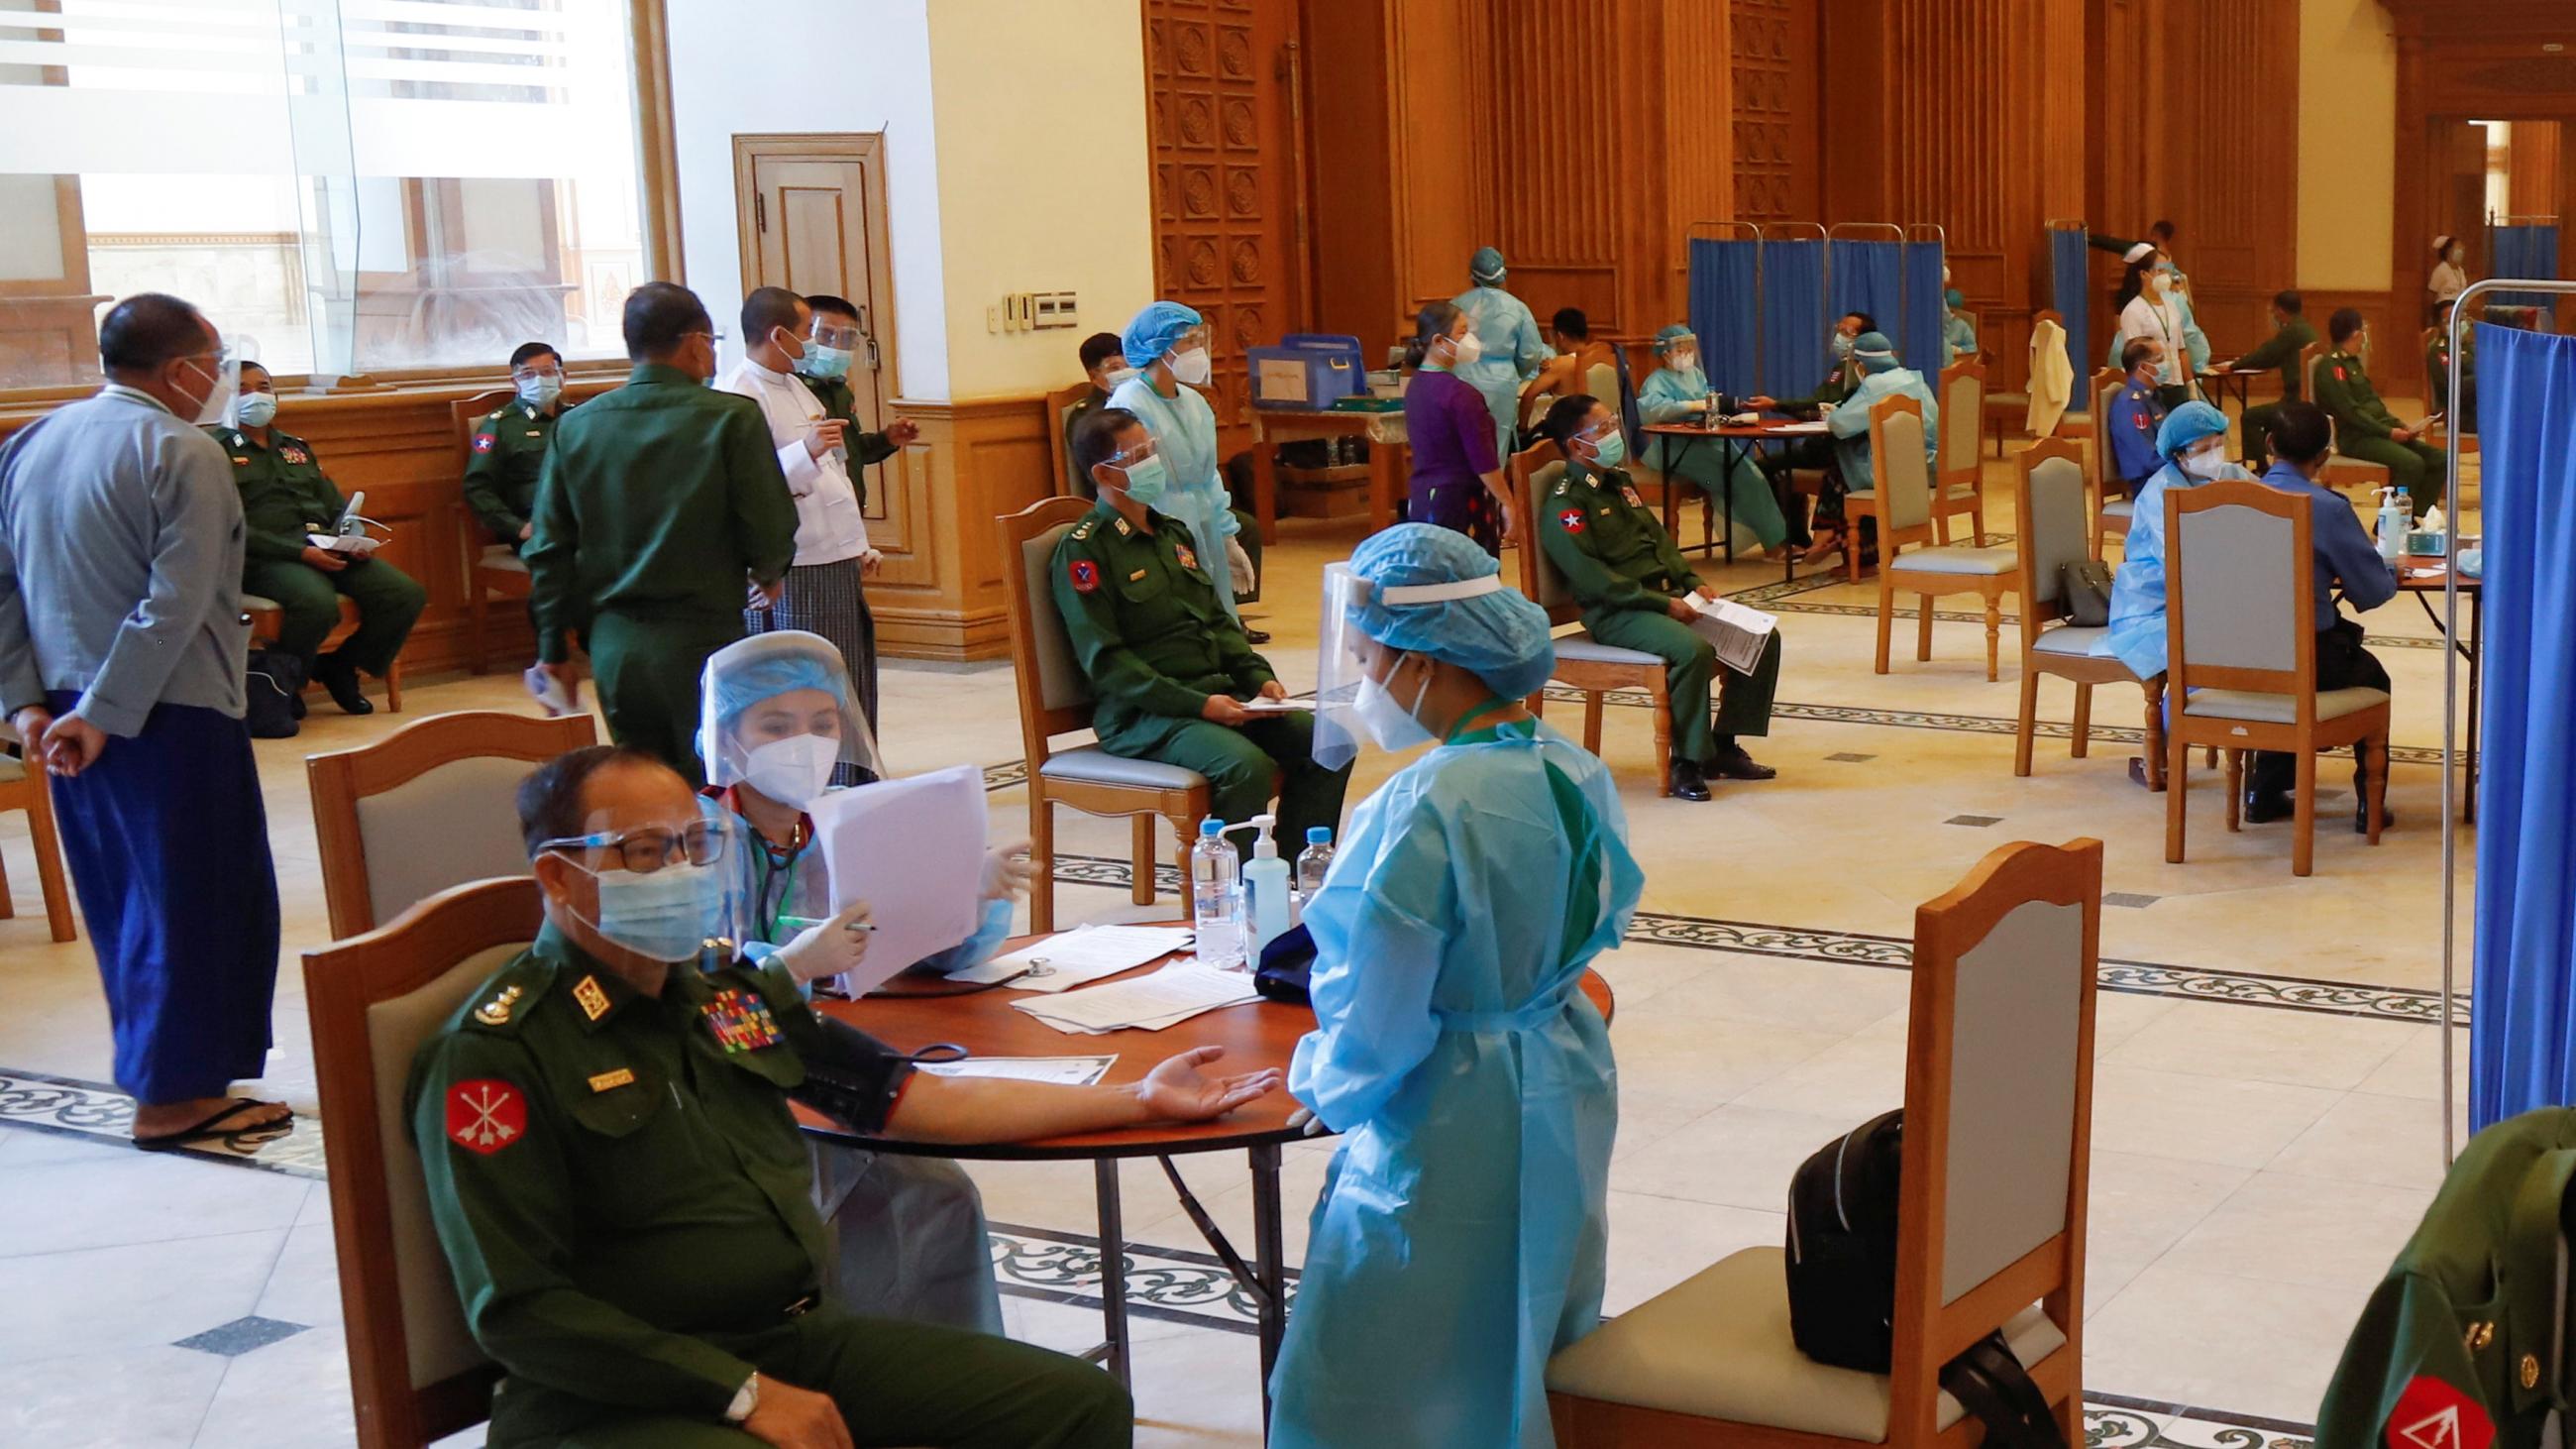 Nurses in turquoise medical gowns administer vaccines to military officers in green uniforms bedecked with medals.